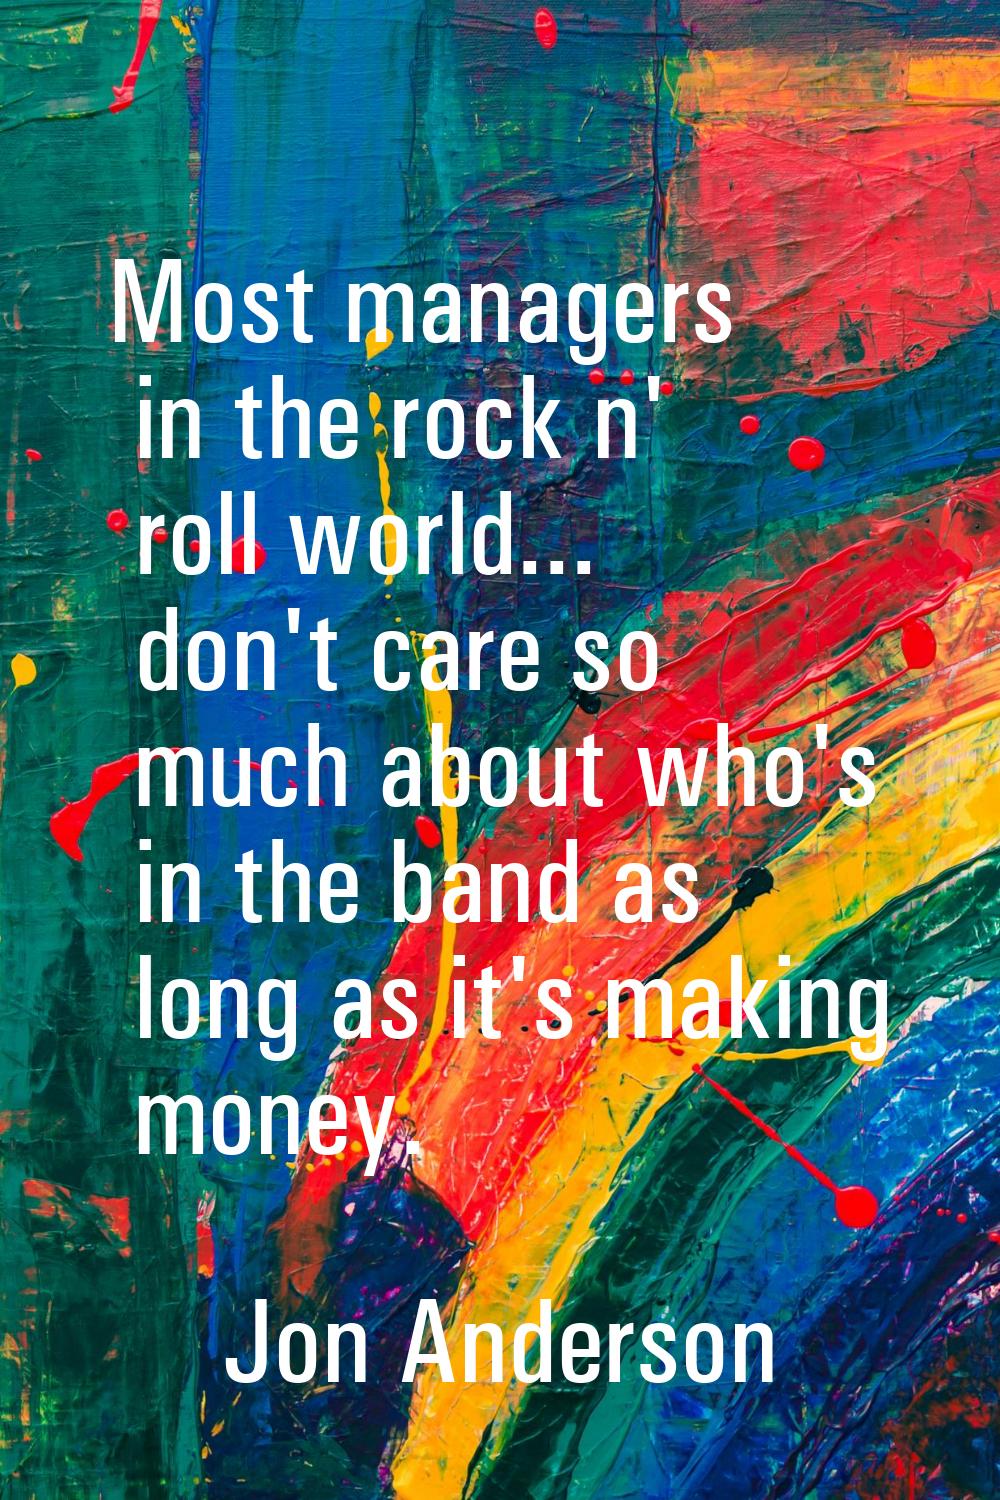 Most managers in the rock n' roll world... don't care so much about who's in the band as long as it